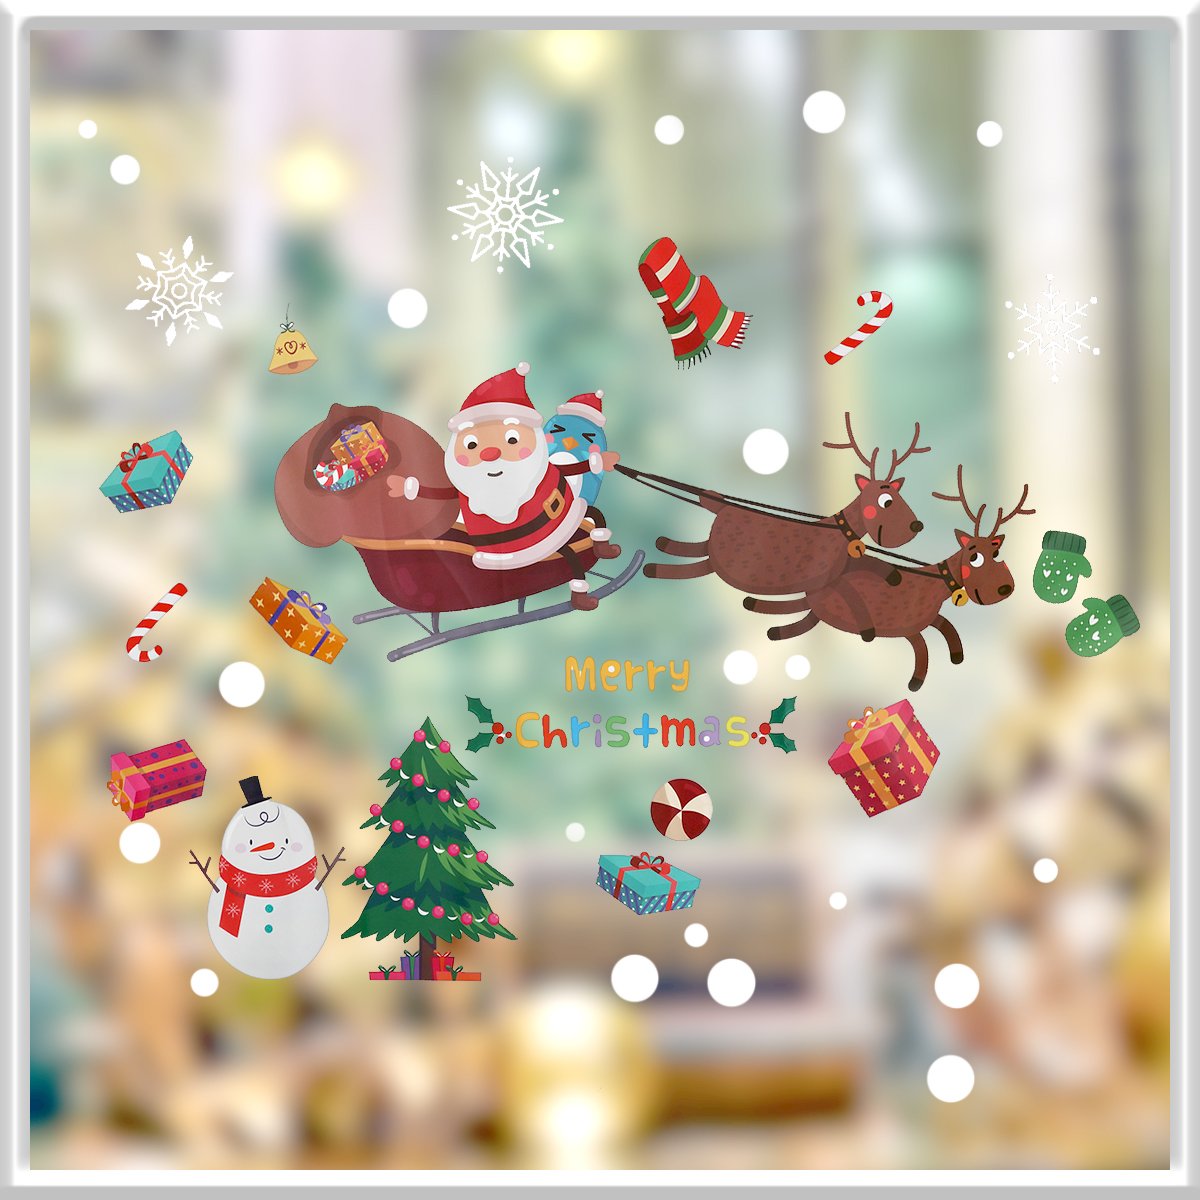 Merry Christmas Wallpaper The Santa Claus Removable Wall Stickers Art Decals Mural DIY Wallpaper for Room Decal